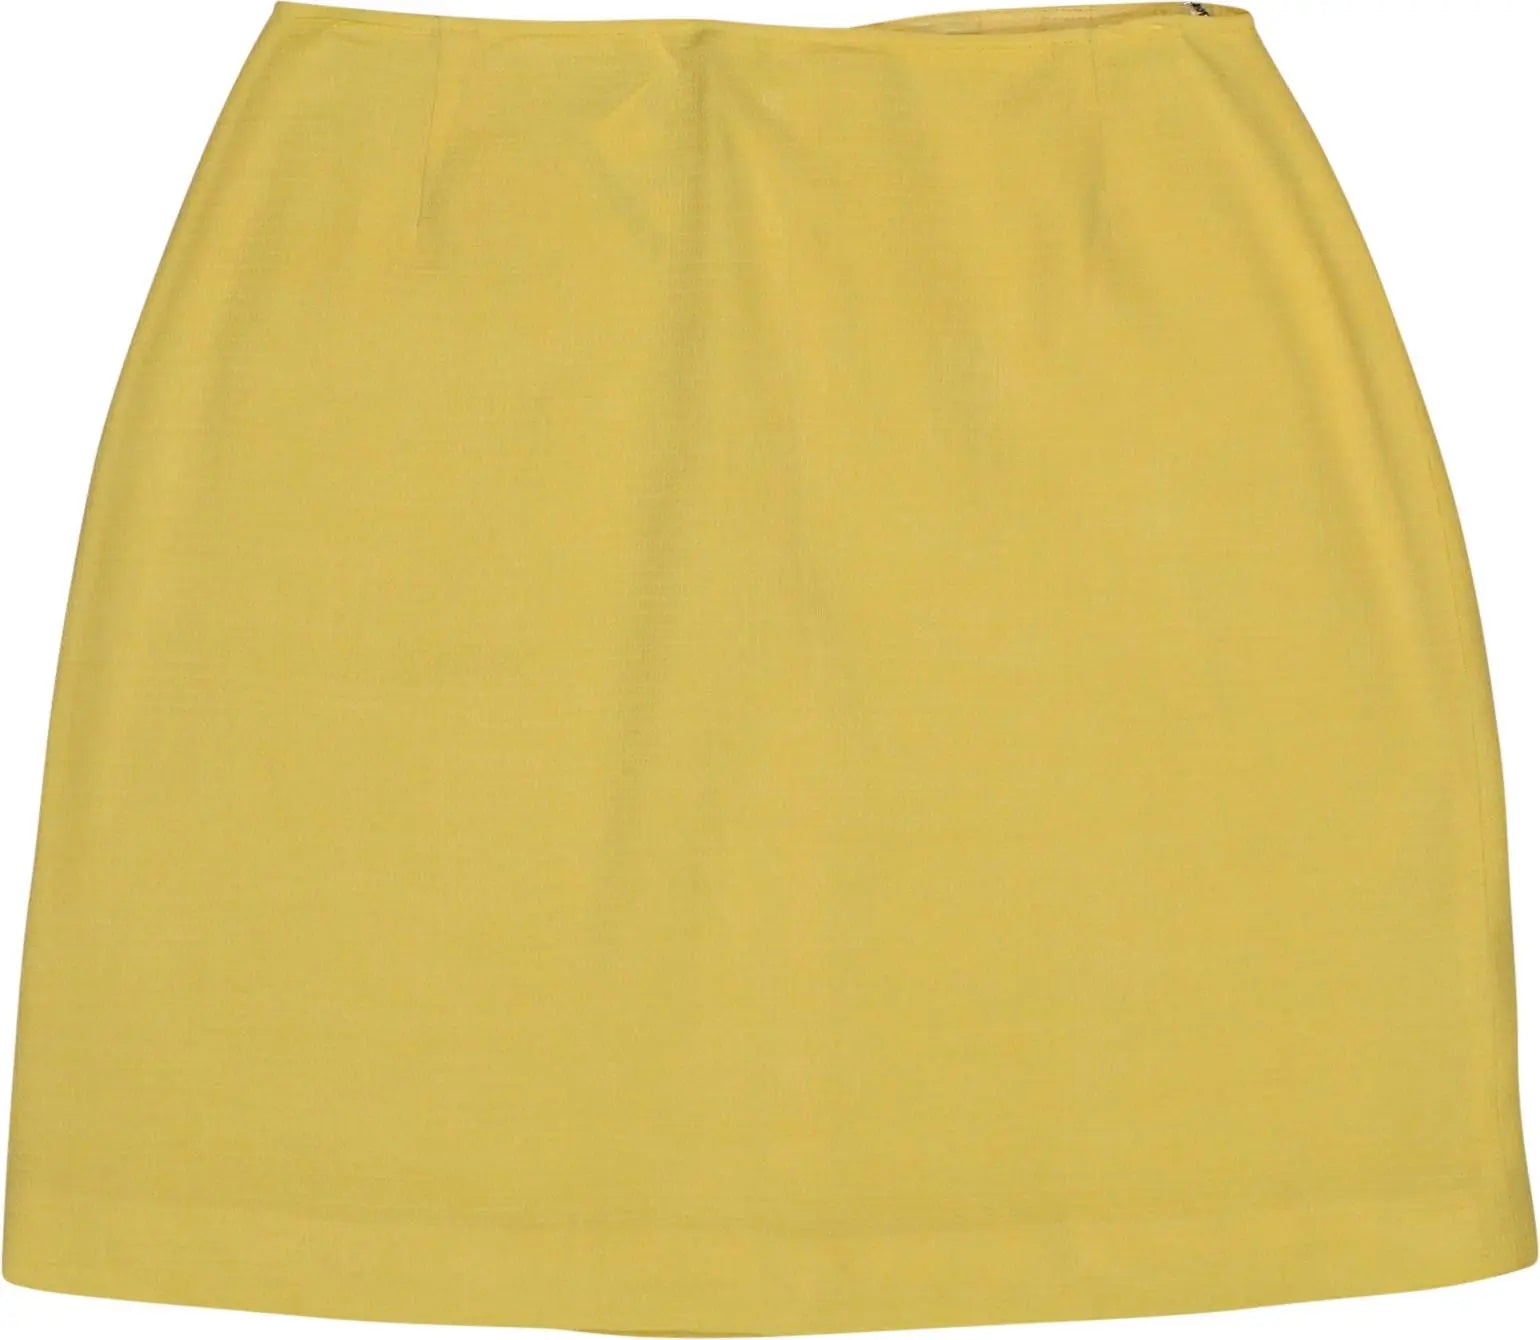 Unknown - Yellow Pencil Skirt- ThriftTale.com - Vintage and second handclothing